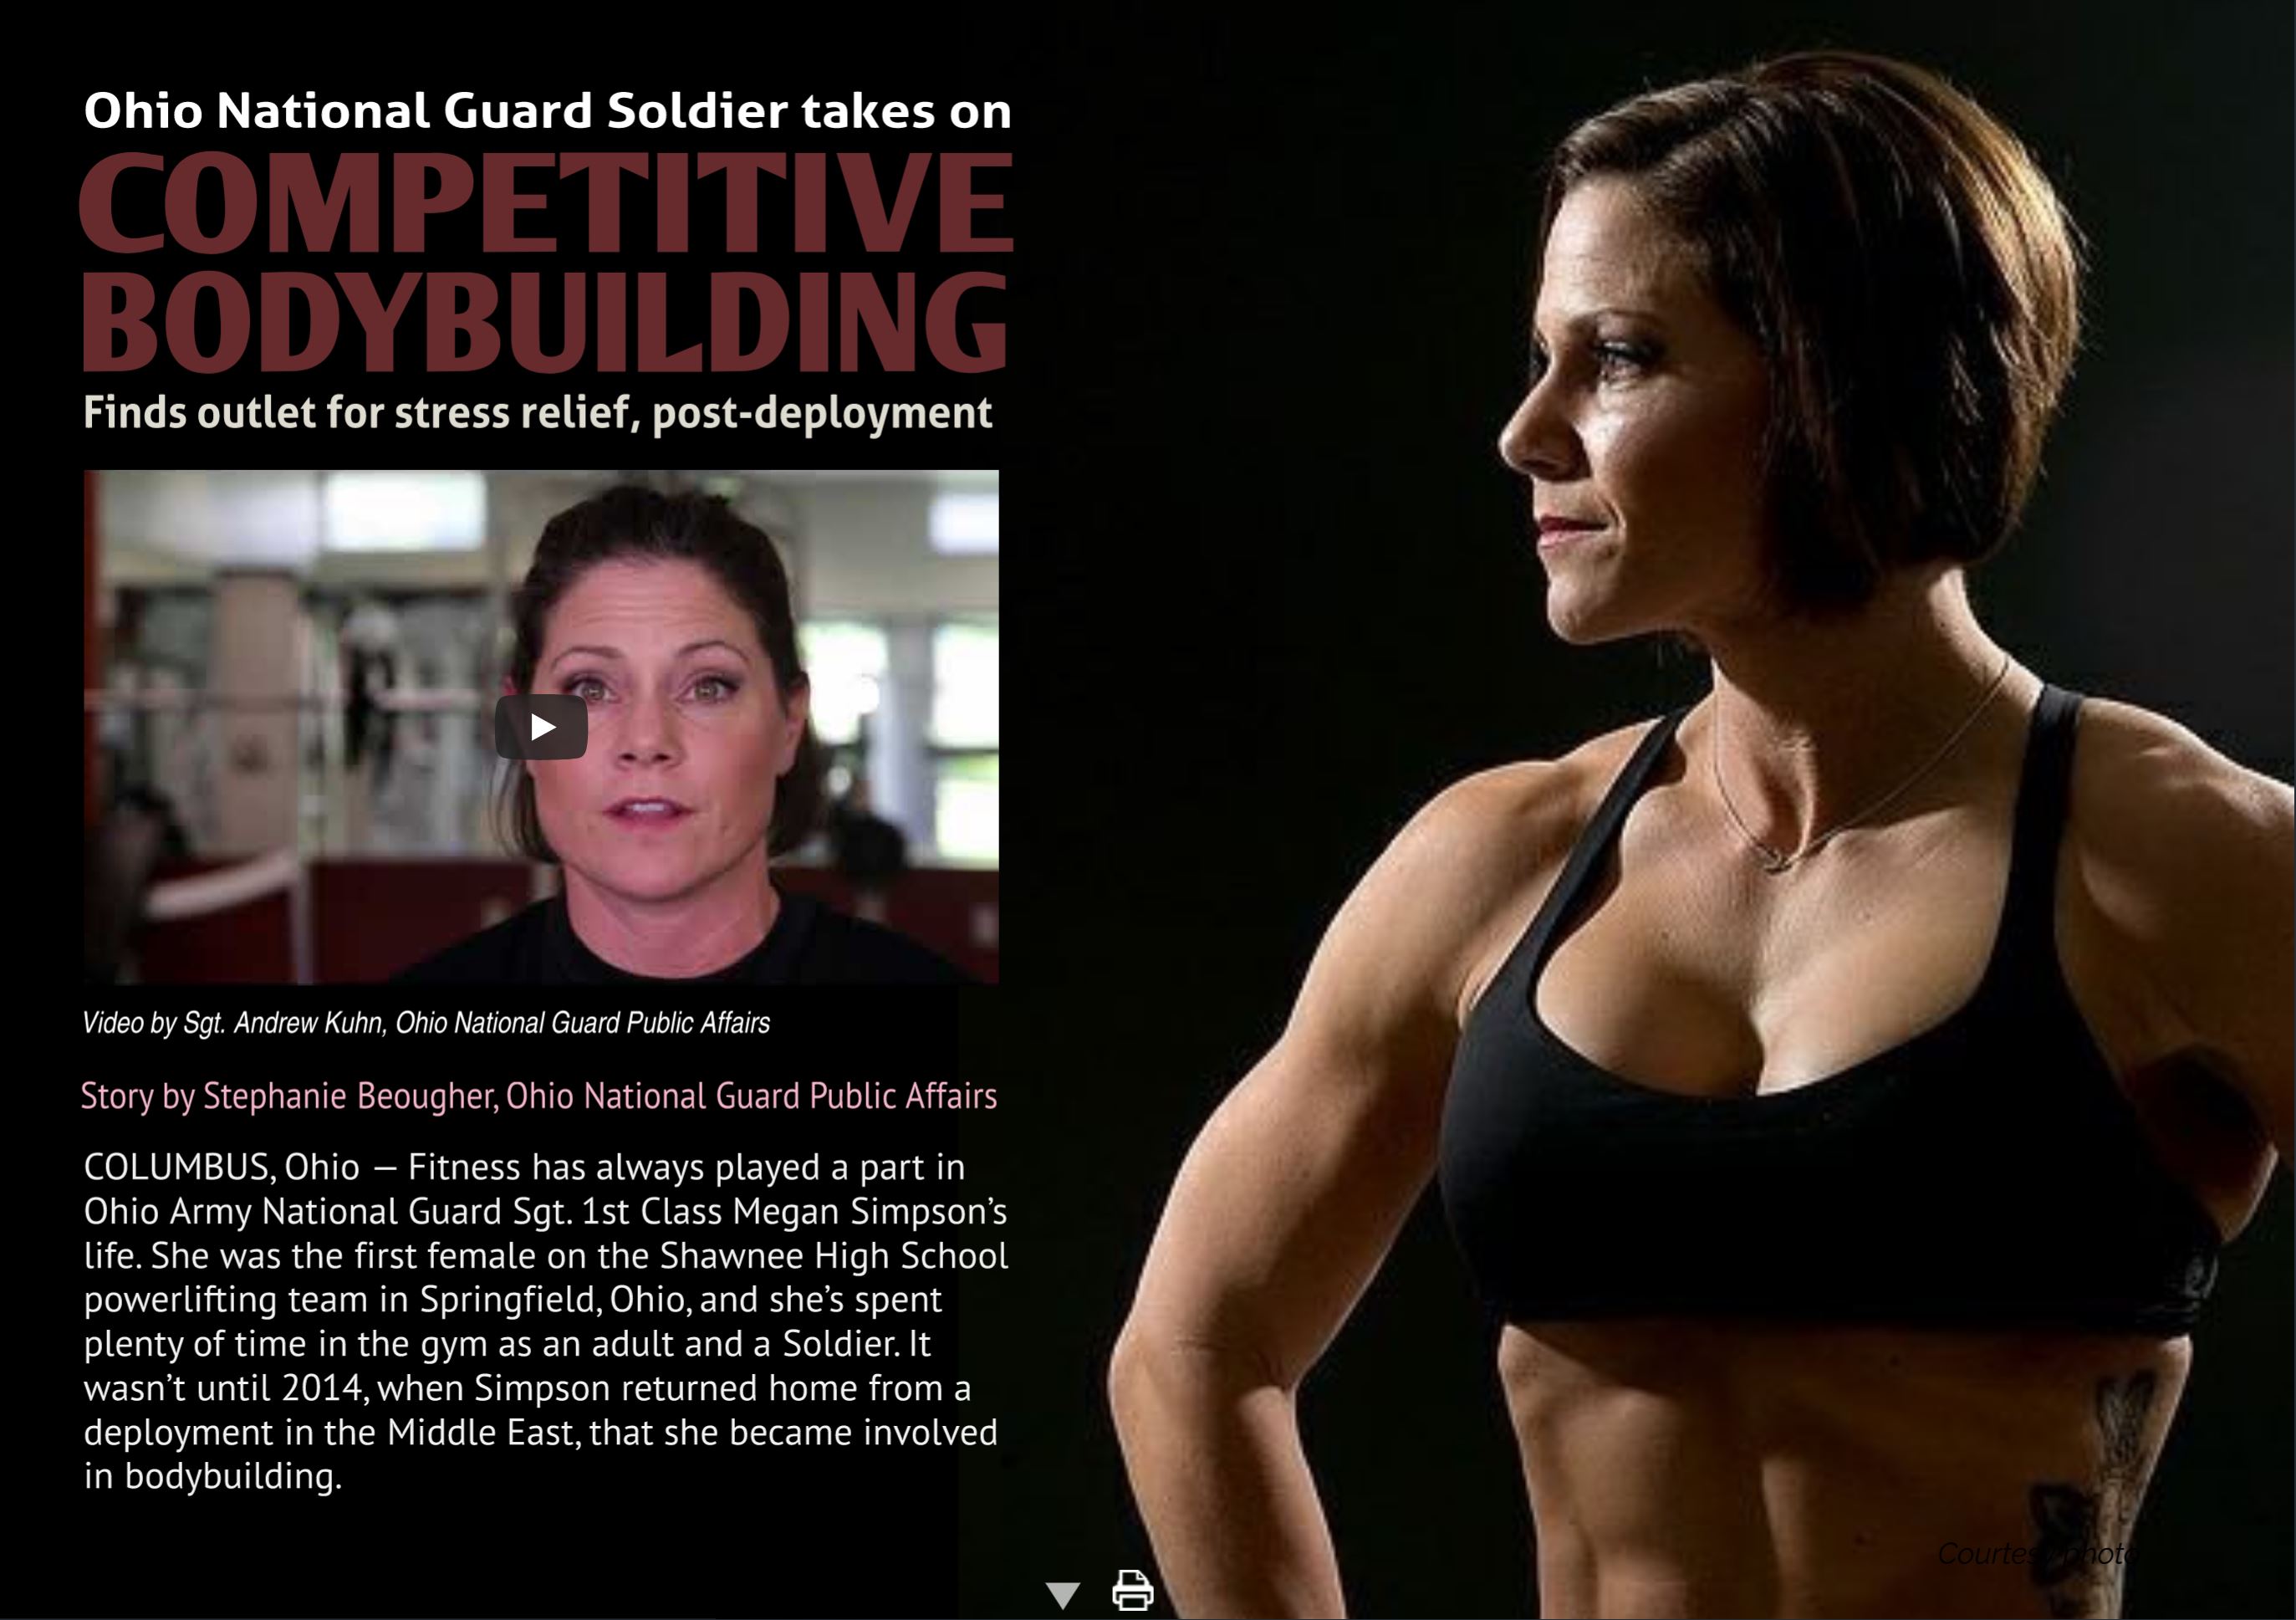 Spread in Jan./Feb. 2018 Buckeye Guard article: Ohio National GUard Soldier takes on Competetive Bodybuilding